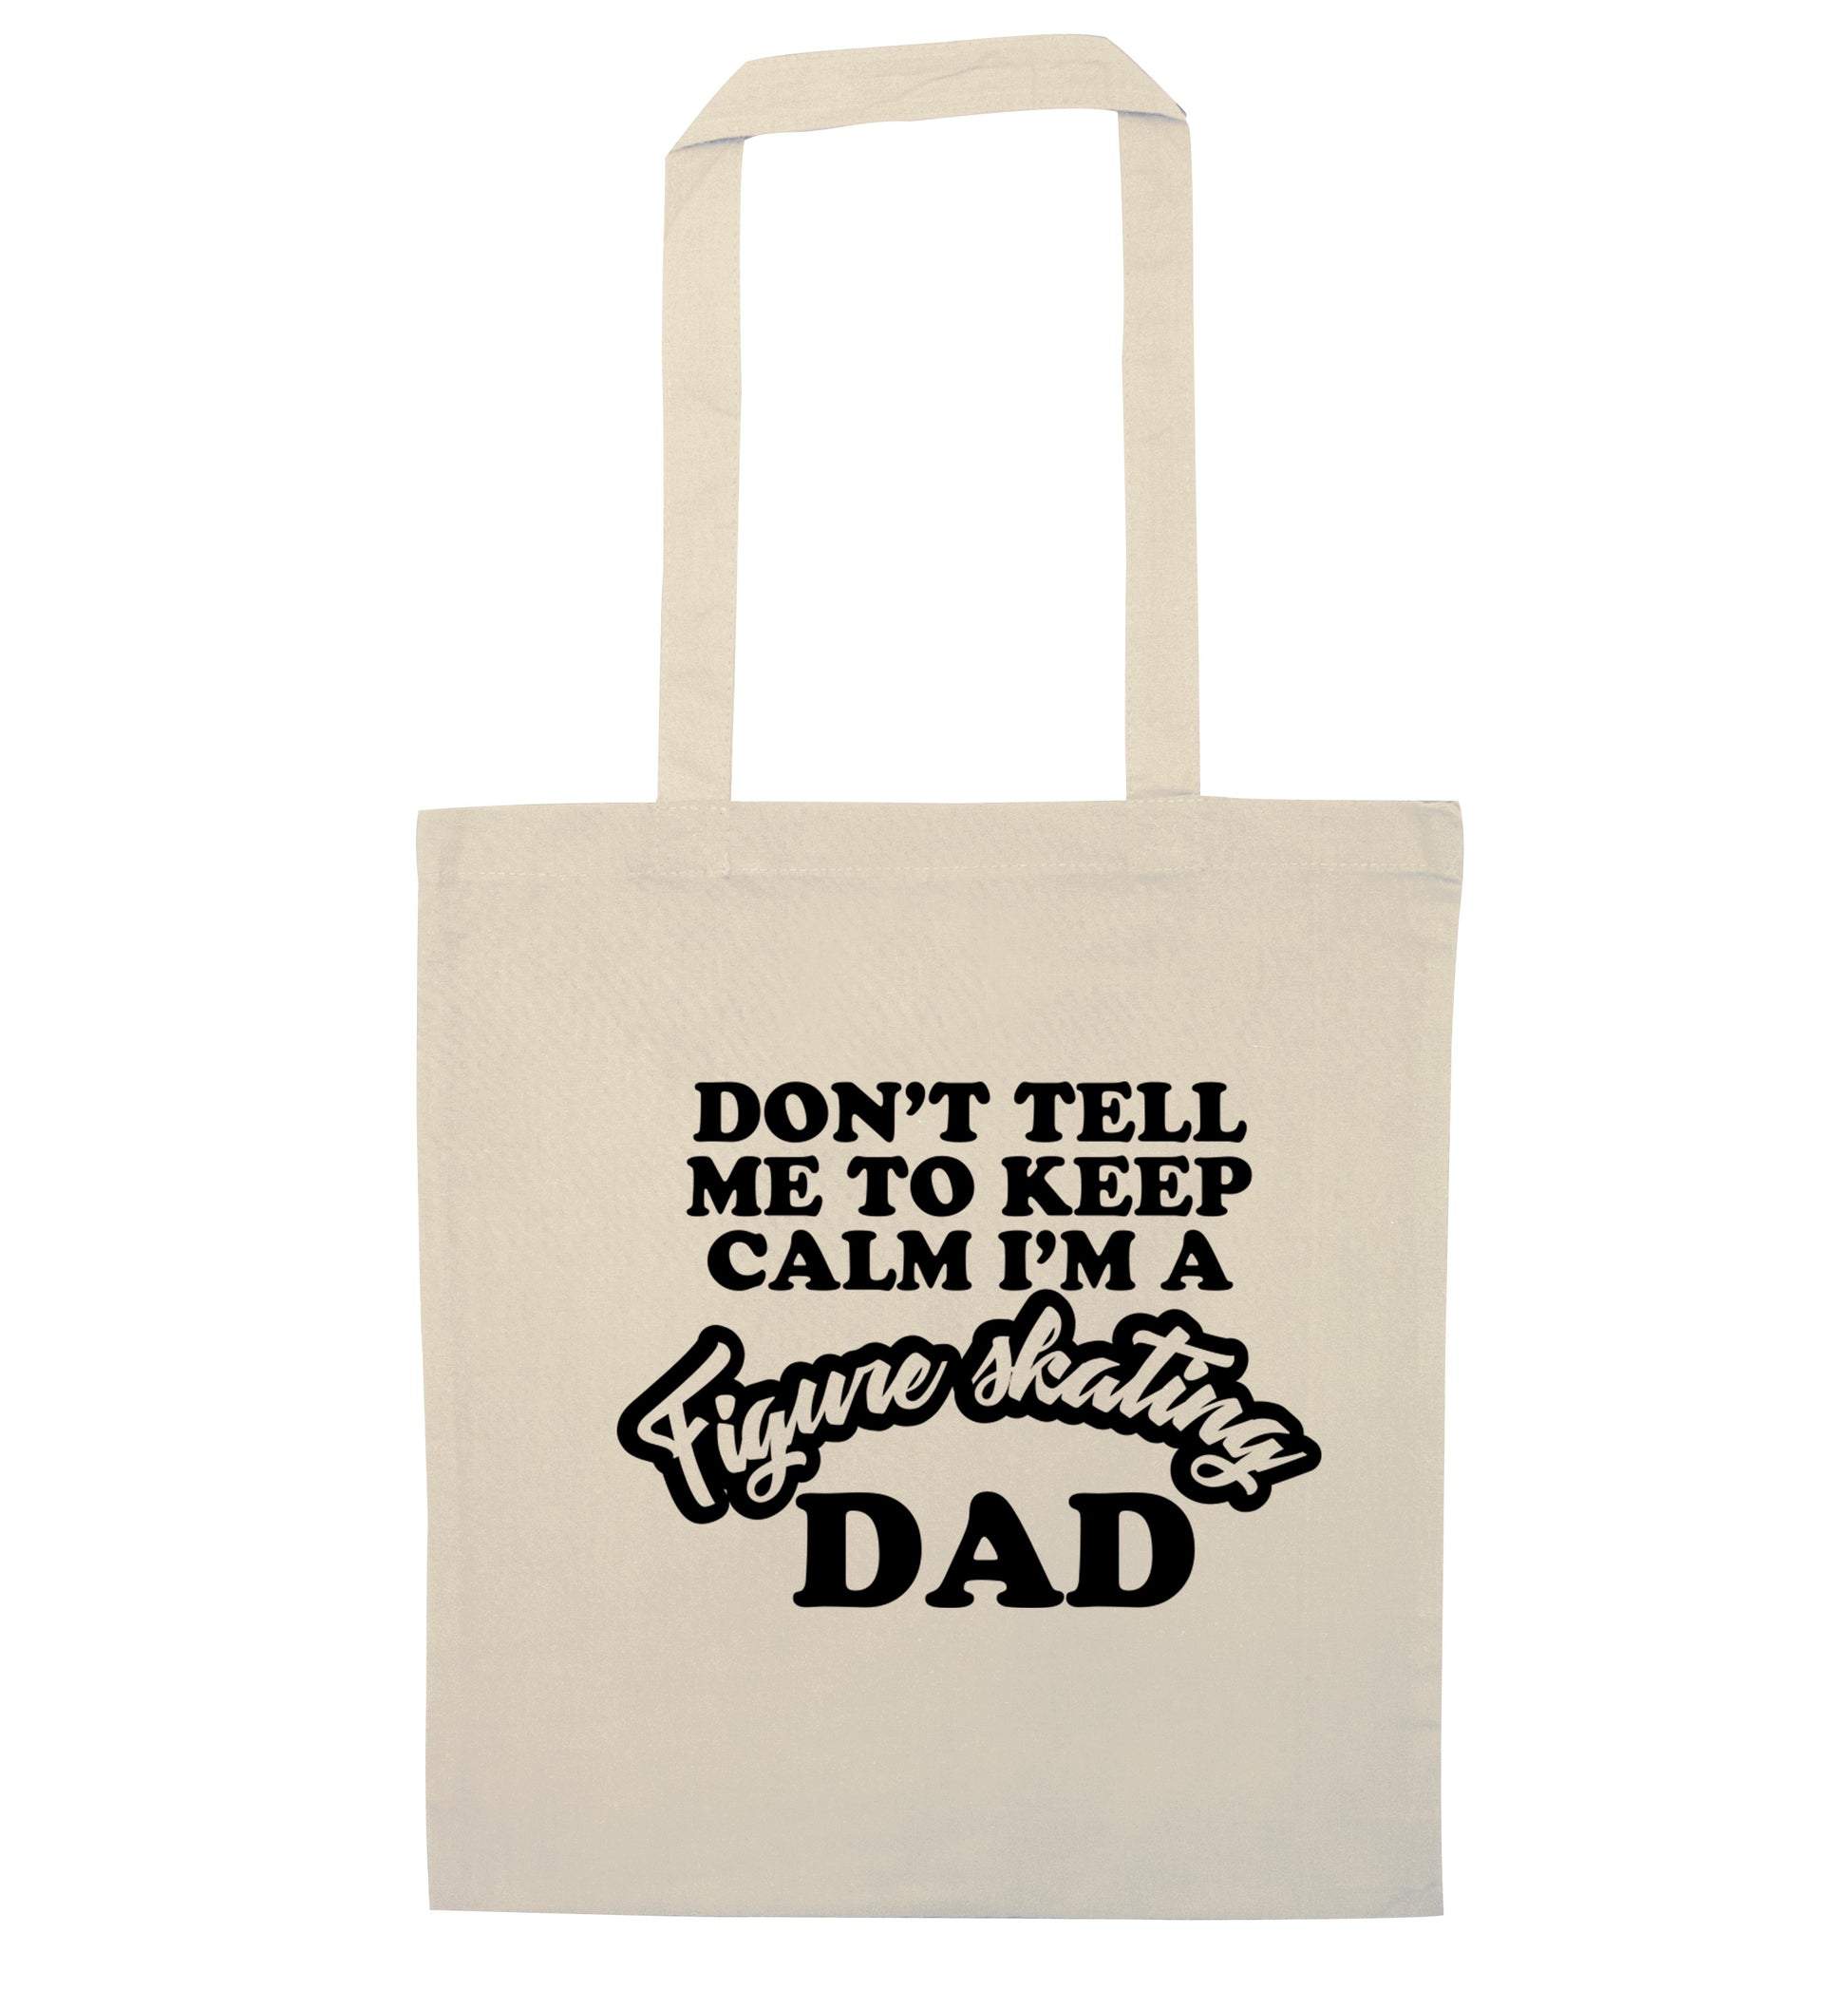 Don't tell me to keep calm I'm a figure skating dad natural tote bag